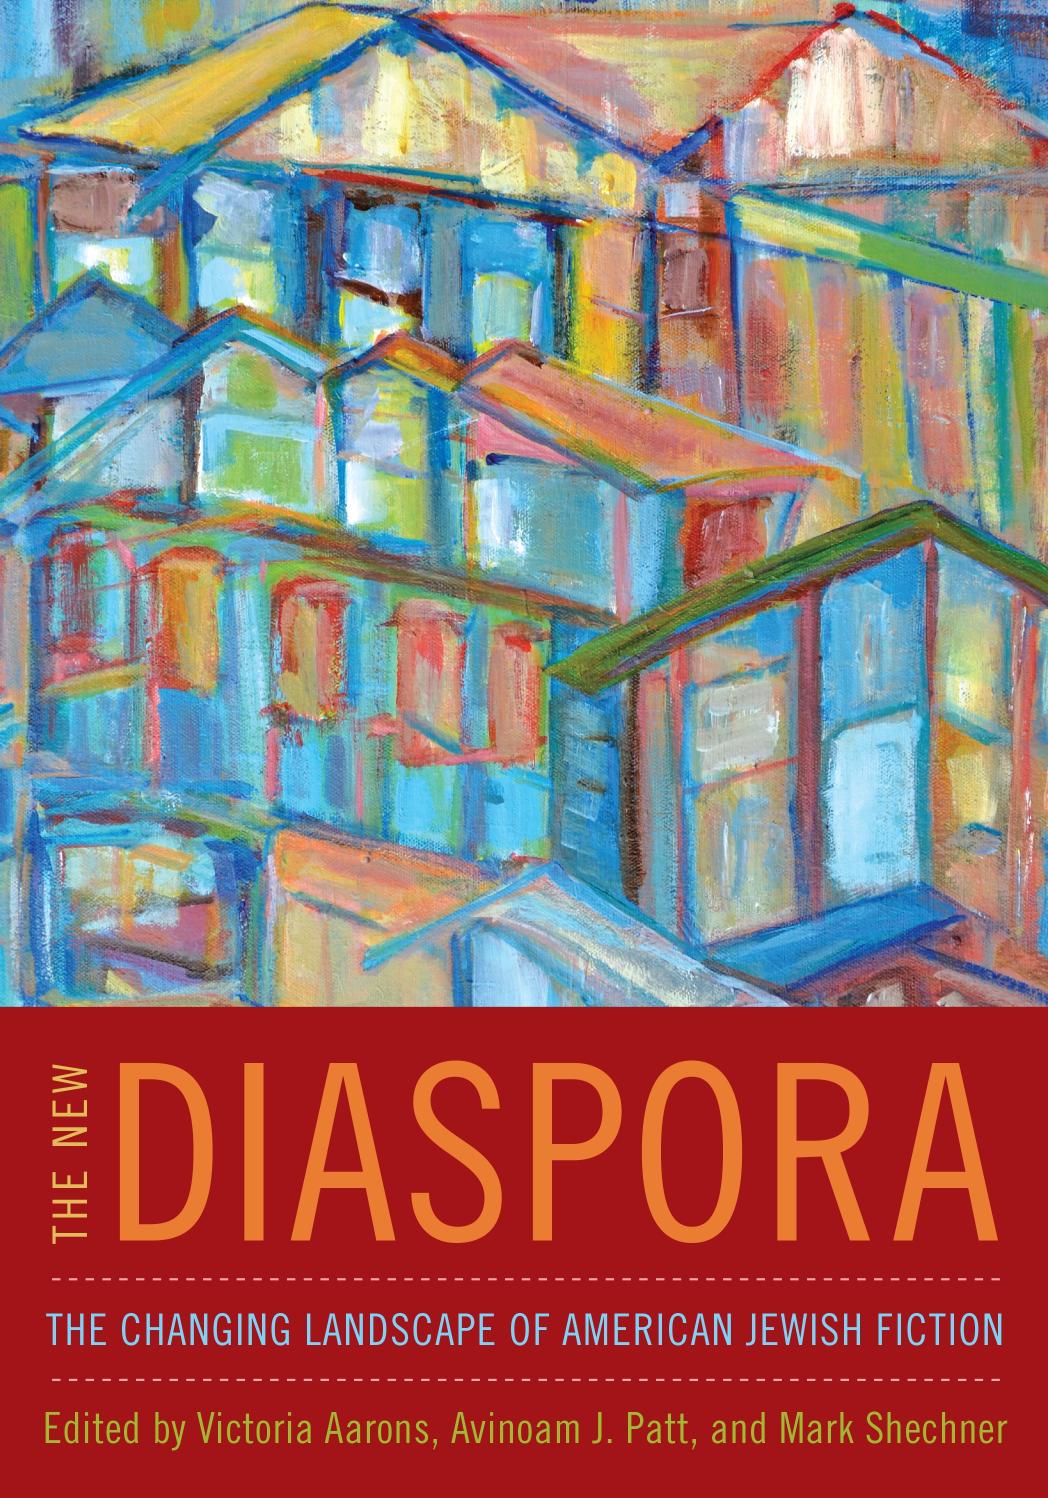 The New Diaspora: The Changing Landscape of American Jewish Fiction